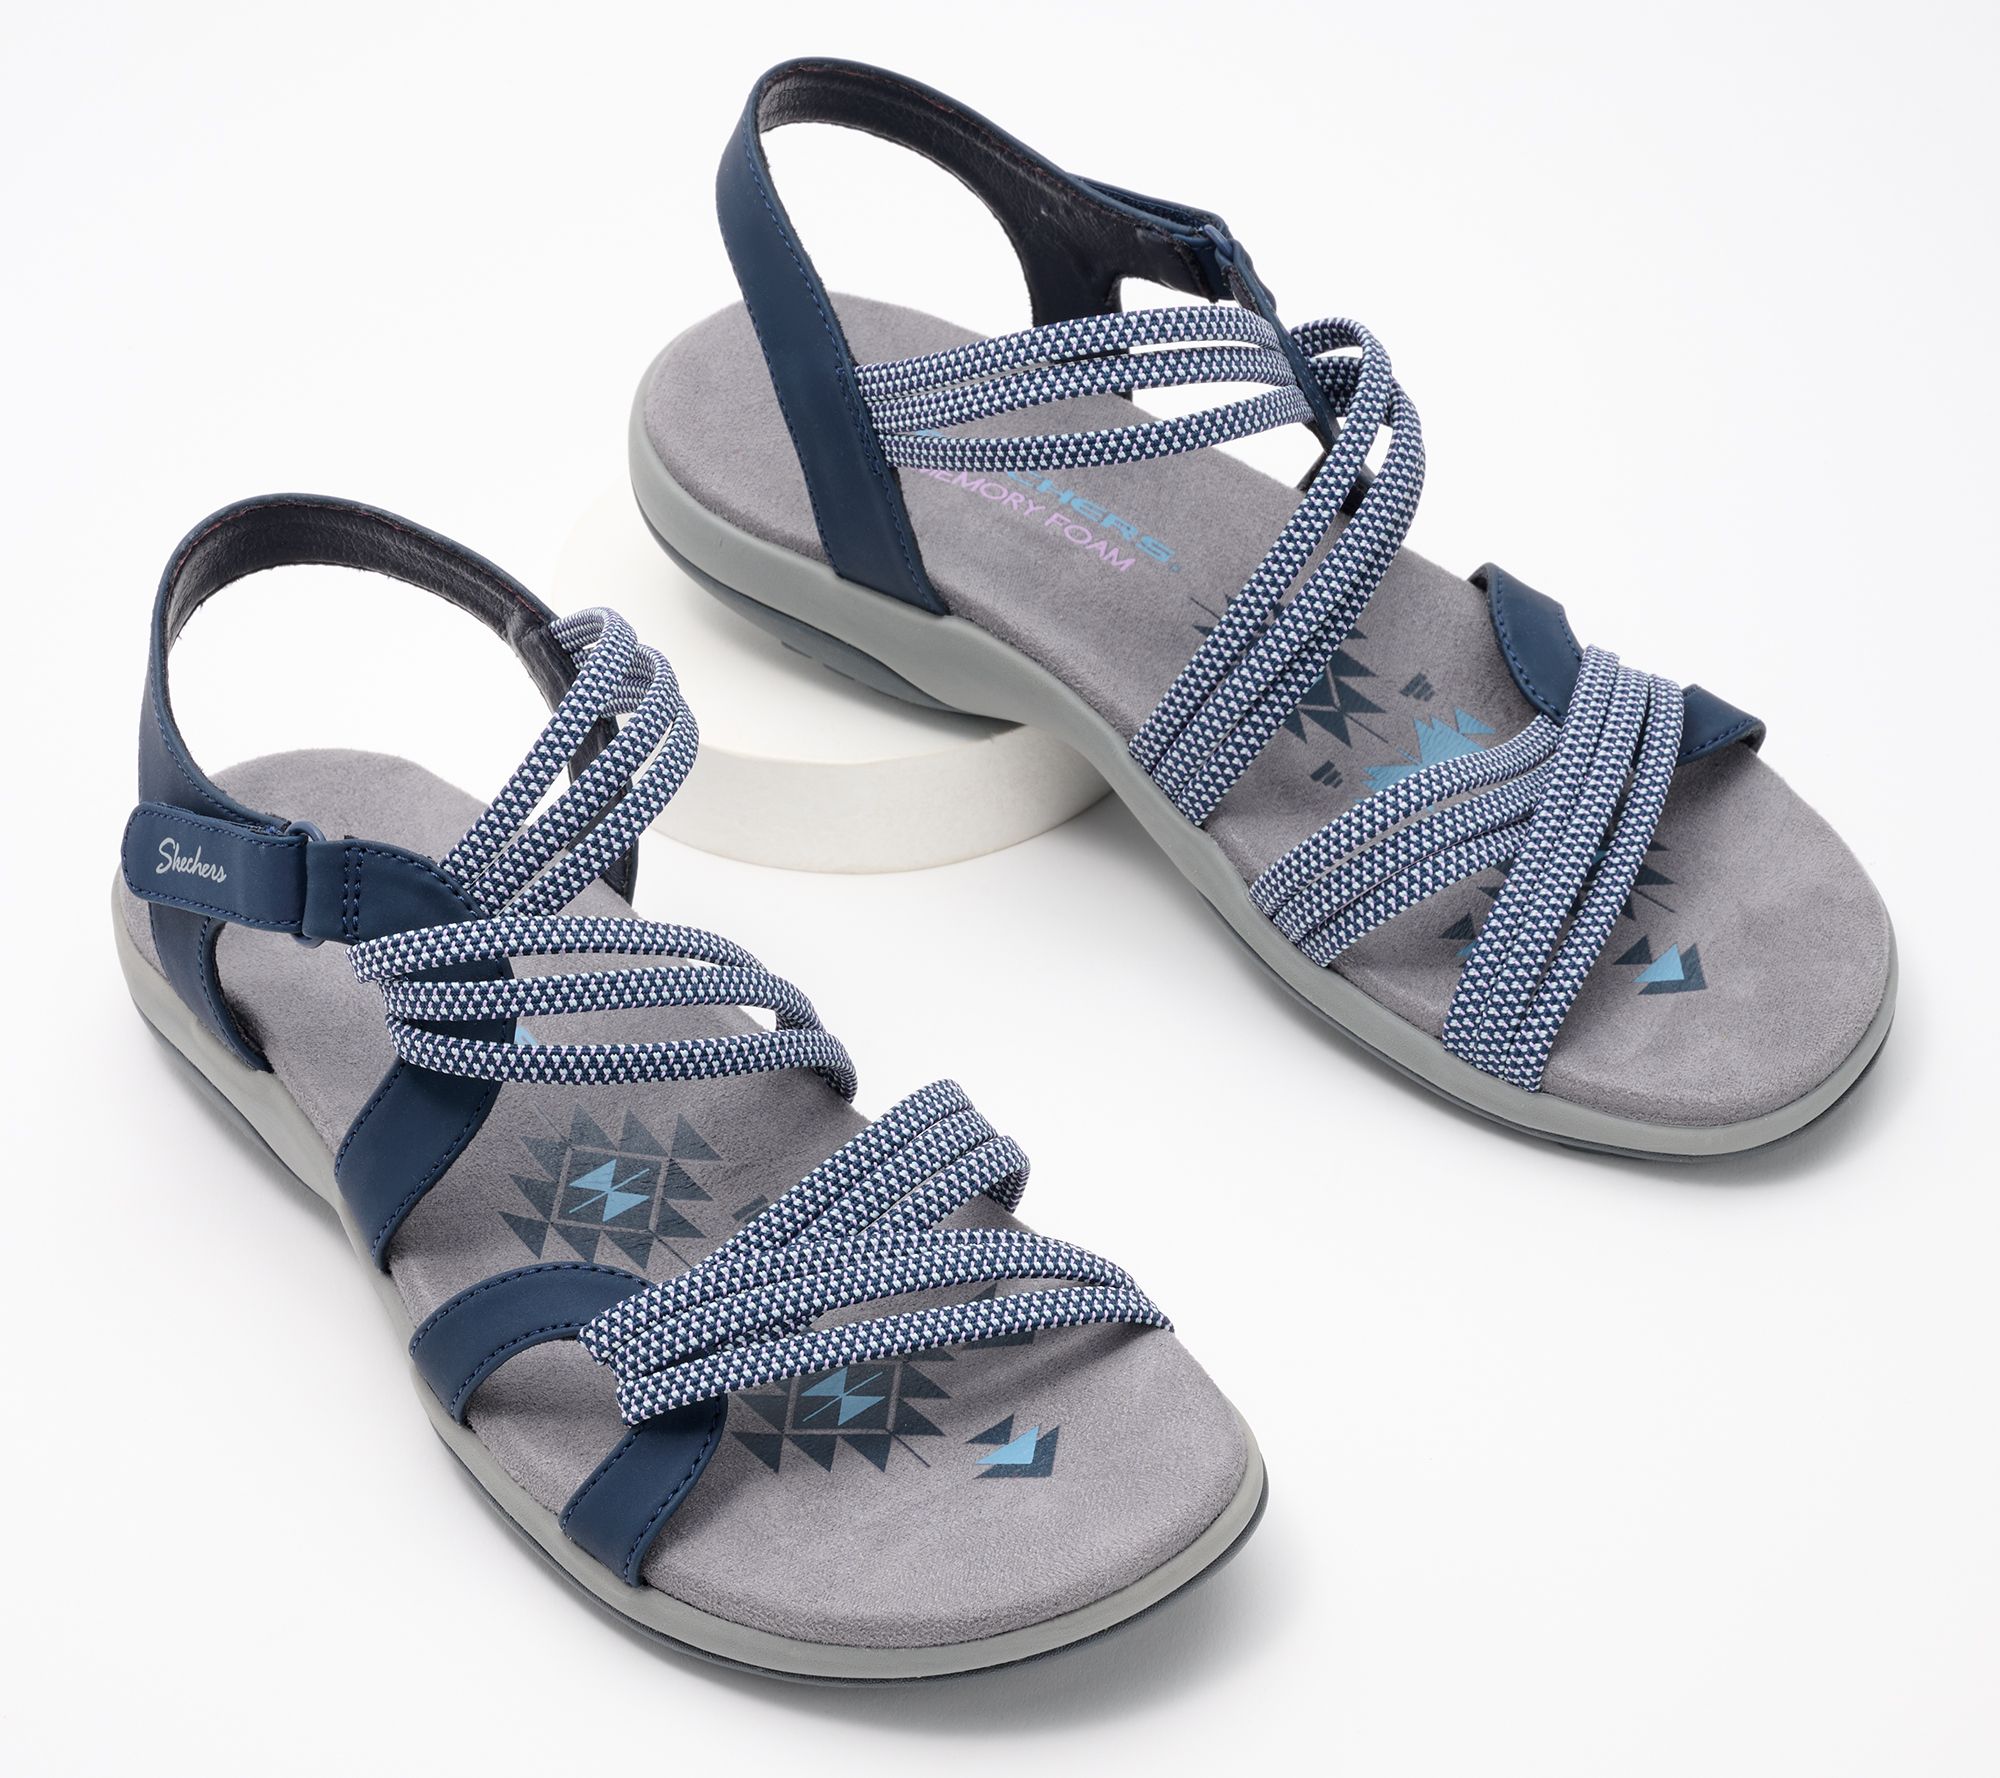 Tread Labs Summer Sandals For Men And Women - Tread Labs